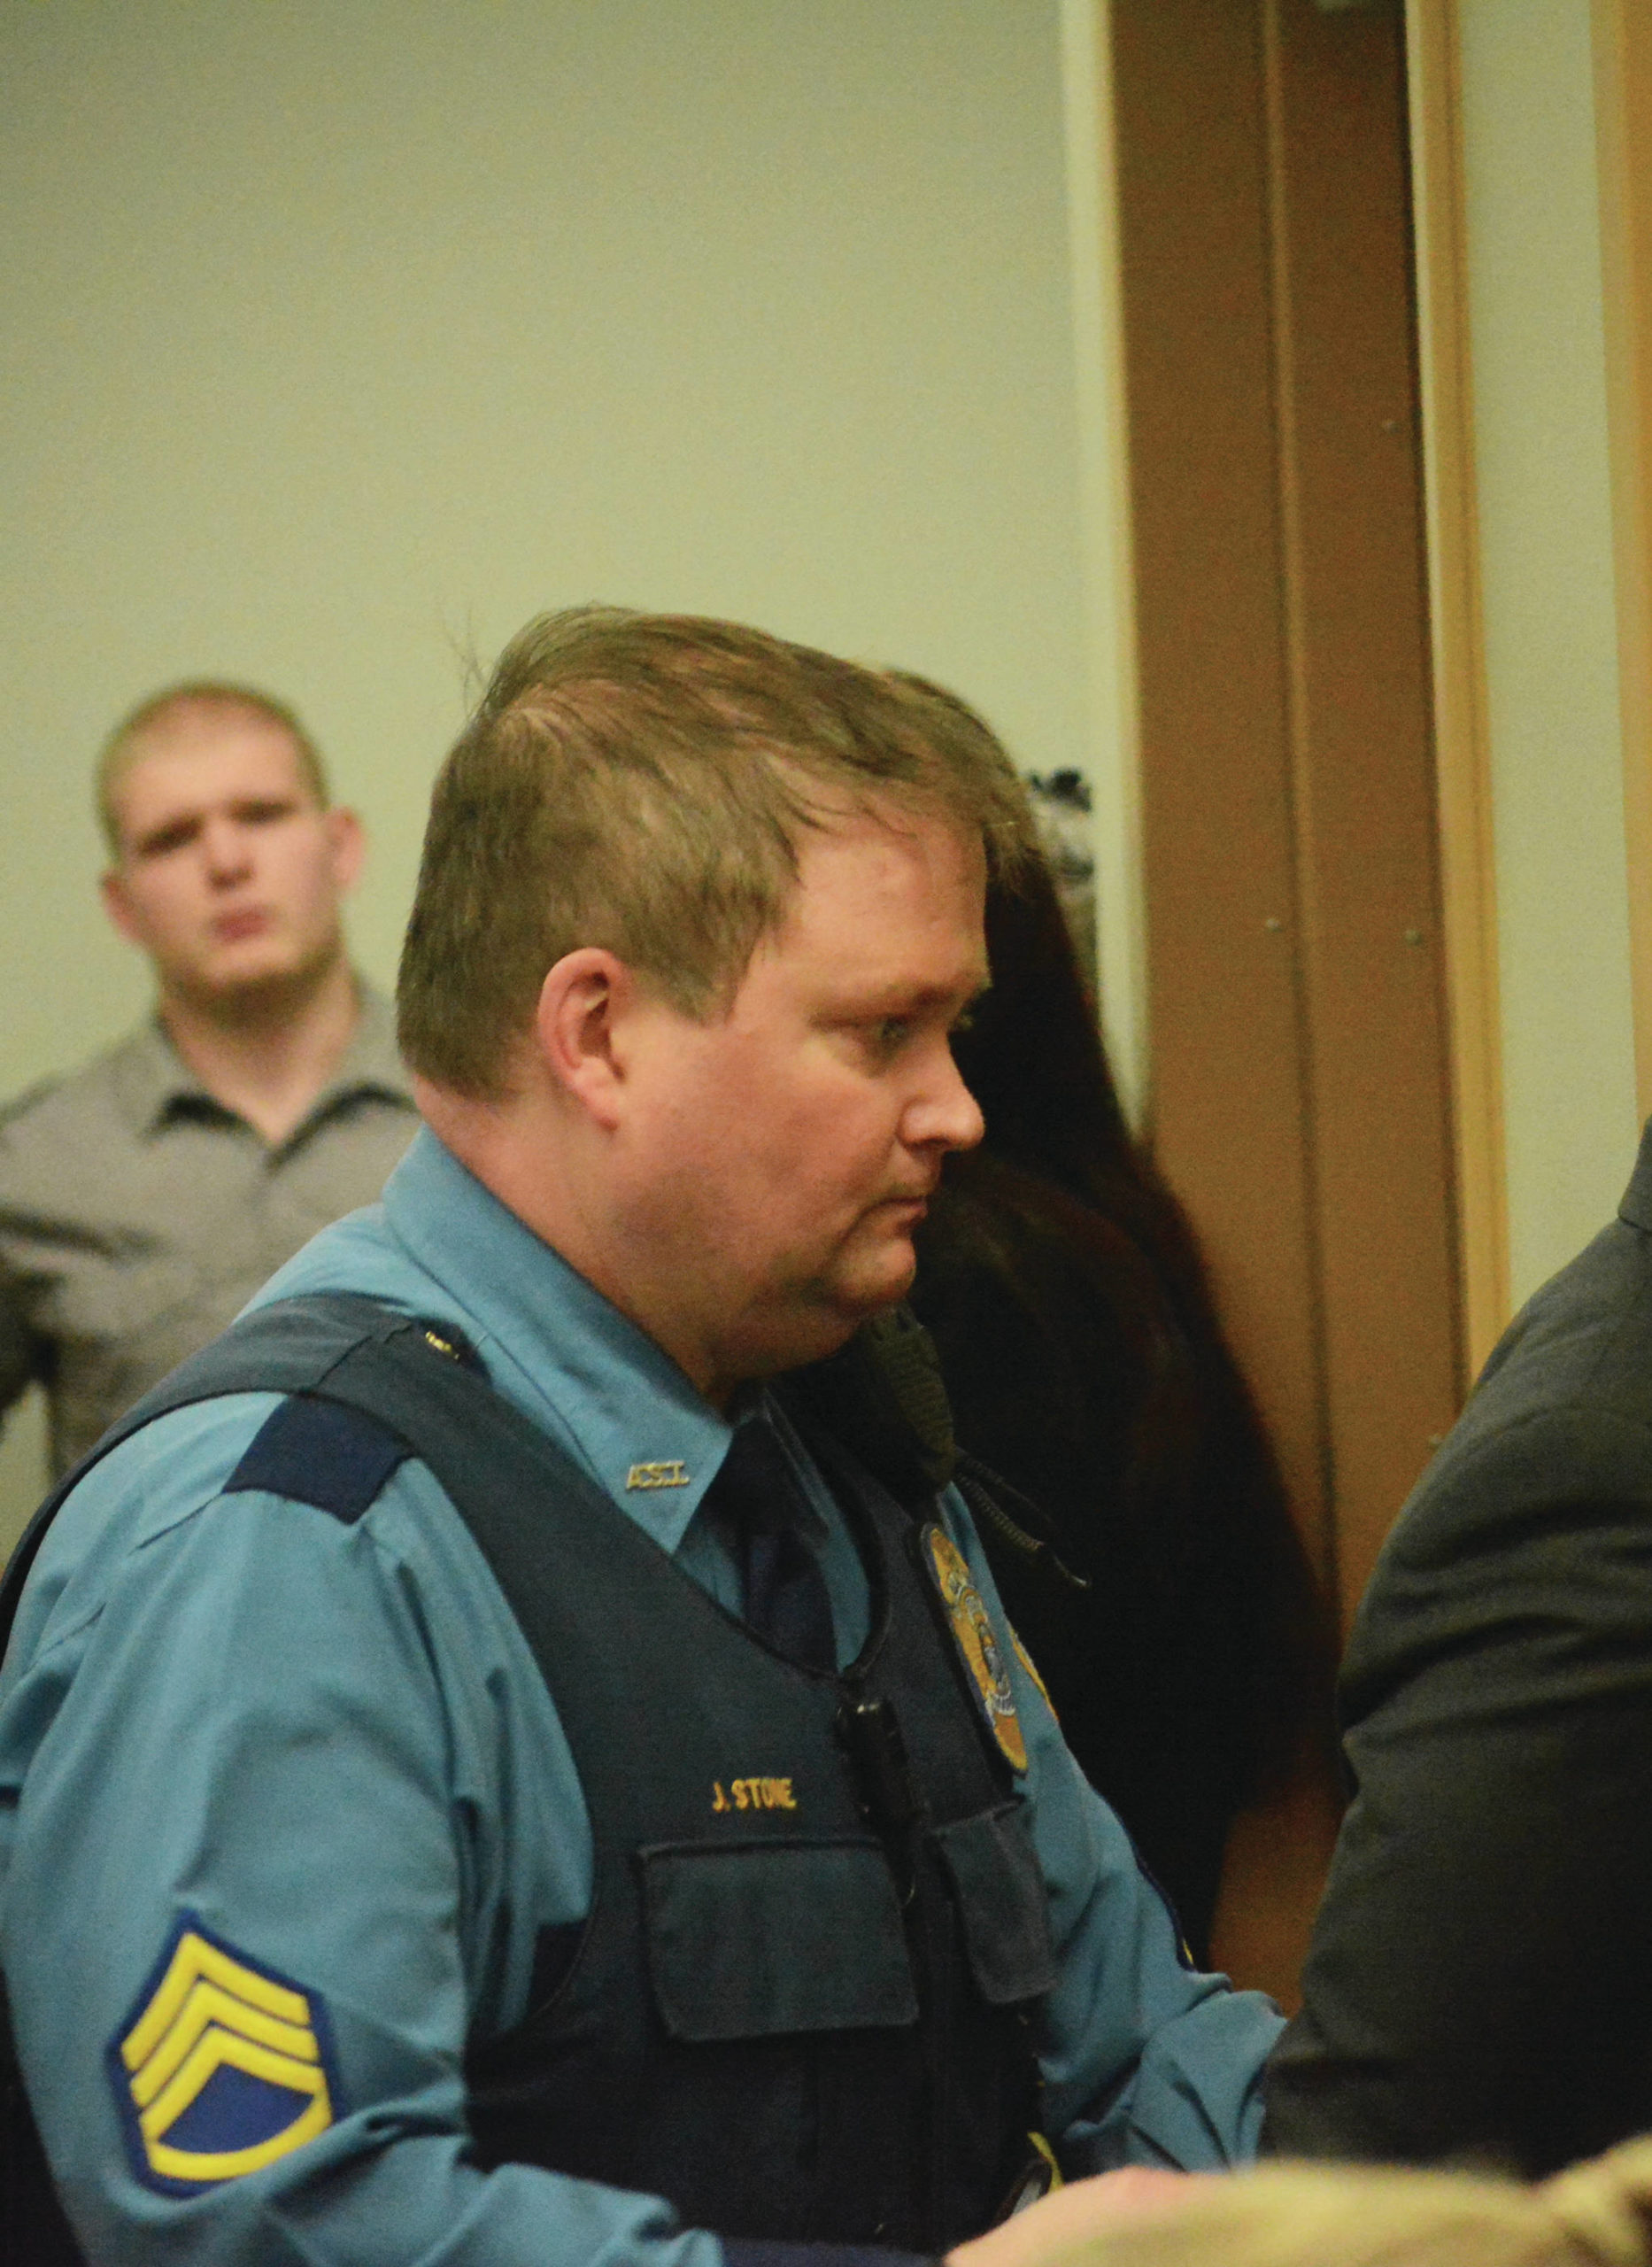 Former Alaska State Trooper Sgt. Jeremy Stone leads a defendant out of a courtroom at the Homer Courthouse at the conclusion of a sentencing hearing on March 12, 2015, in Homer, Alaska. (Photo by Michael Armstrong/Homer News)